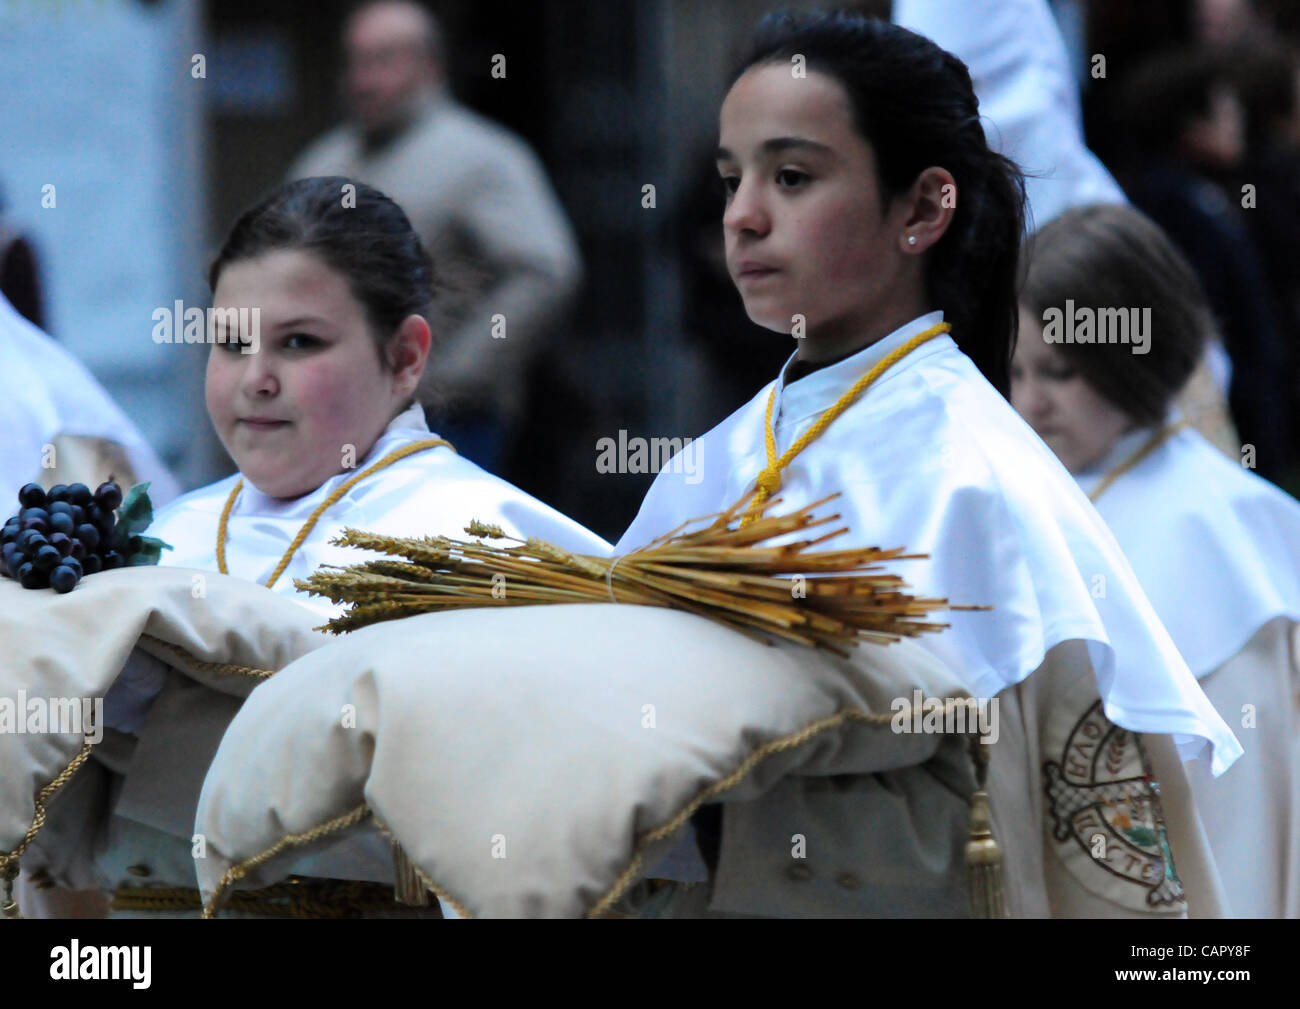 Semana Santa 2012: Traditional processions of Easter in the spanish city of Valladolid Girls of the Cofradia de la Ultima Cena carrying the symbols of the last dinner: grain and grapes representing the blood and body of Jesus following the Christian tradition. Stock Photo